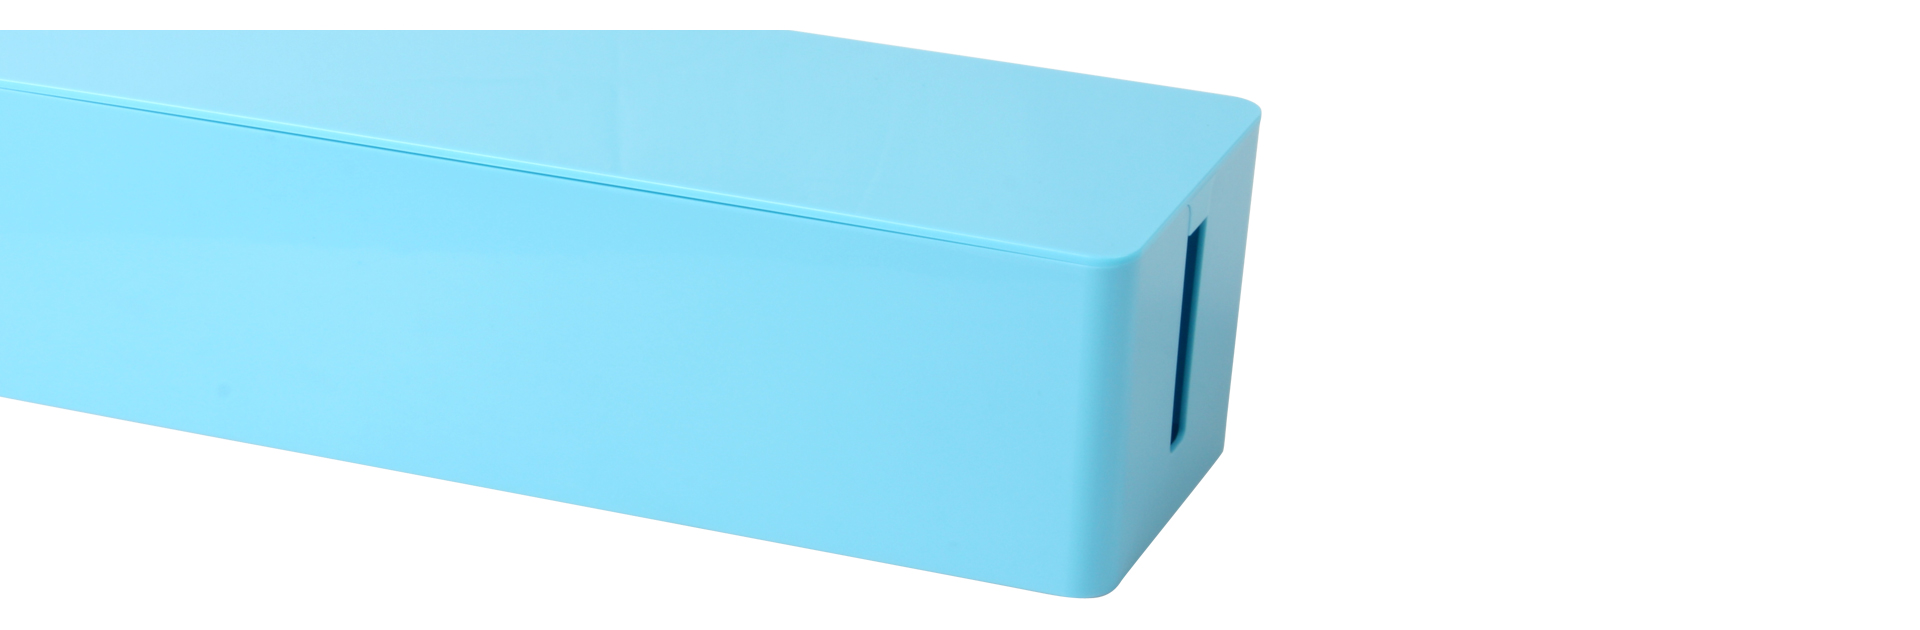 the protective box is made of Fireproof material, safe and durable